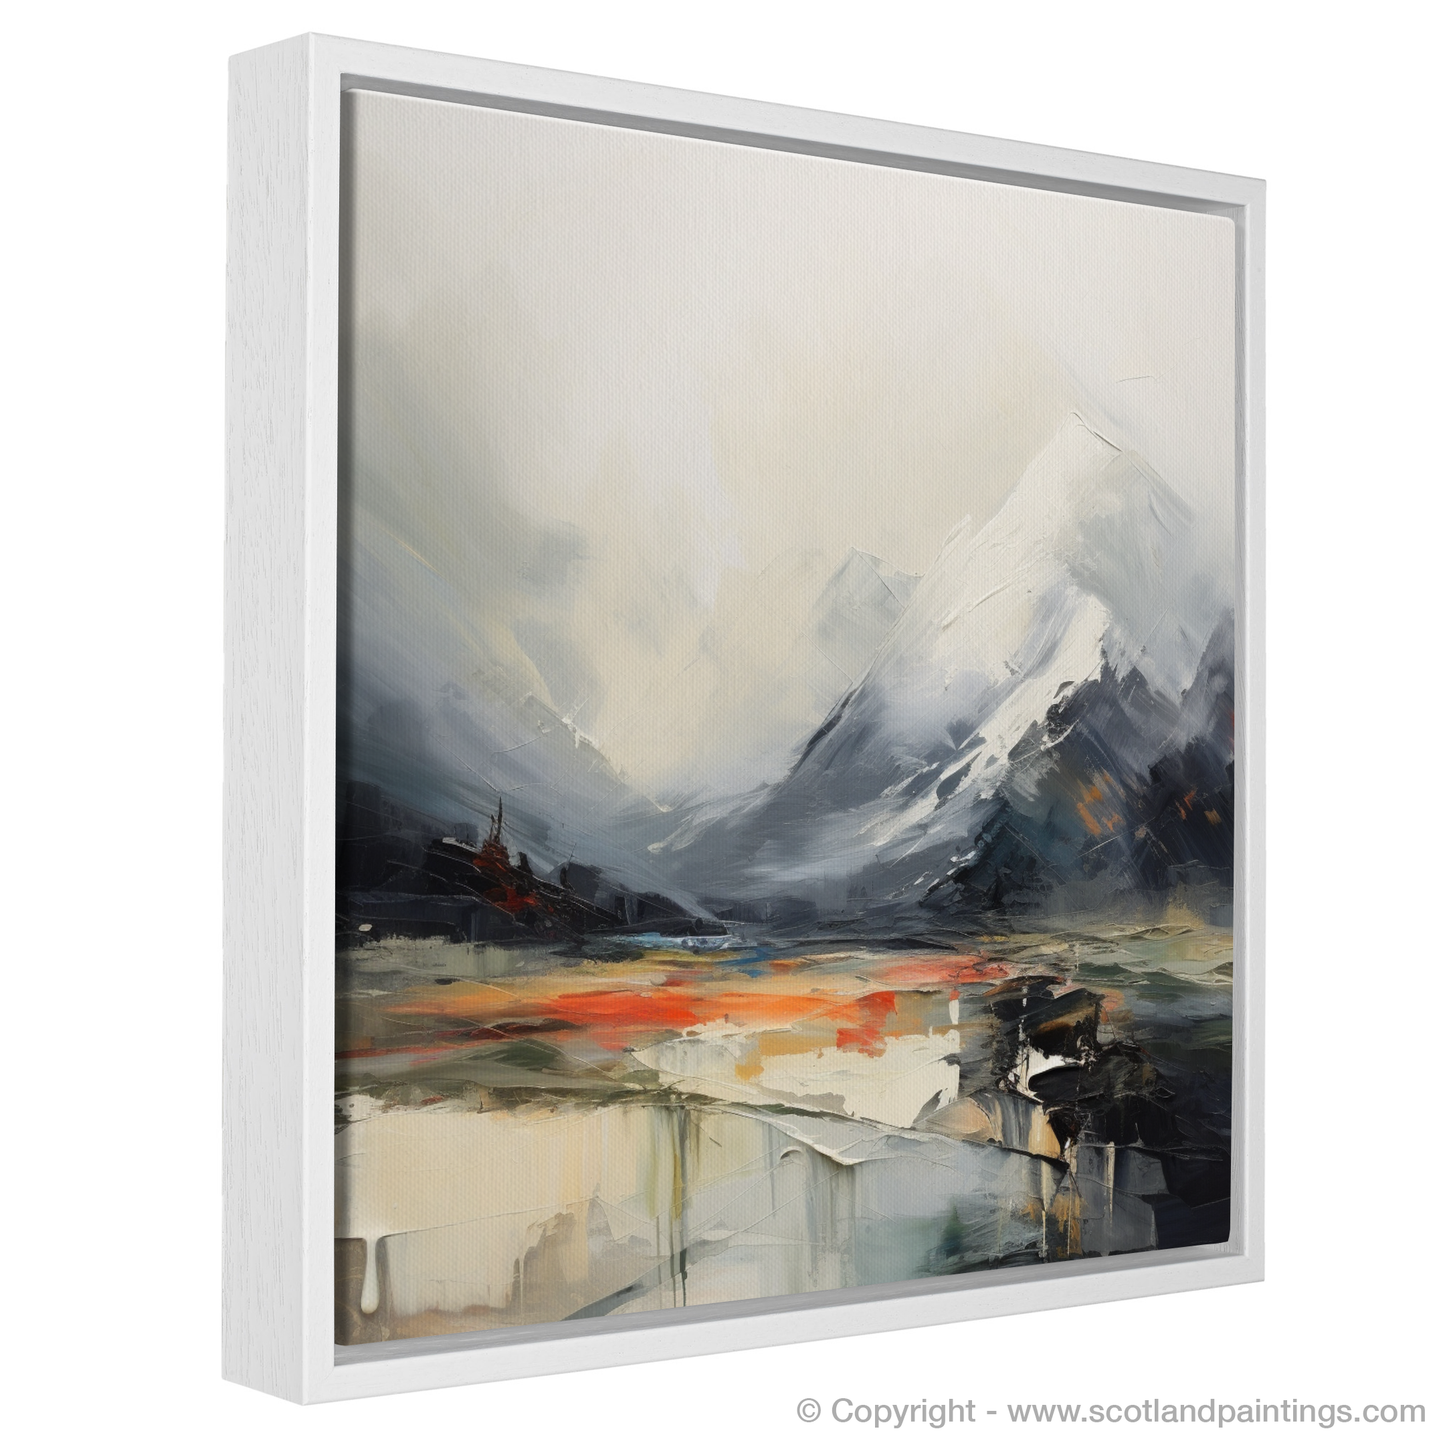 Painting and Art Print of Rolling fog in Glencoe entitled "Mystic Majesty of Glencoe: An Expressionist Homage".